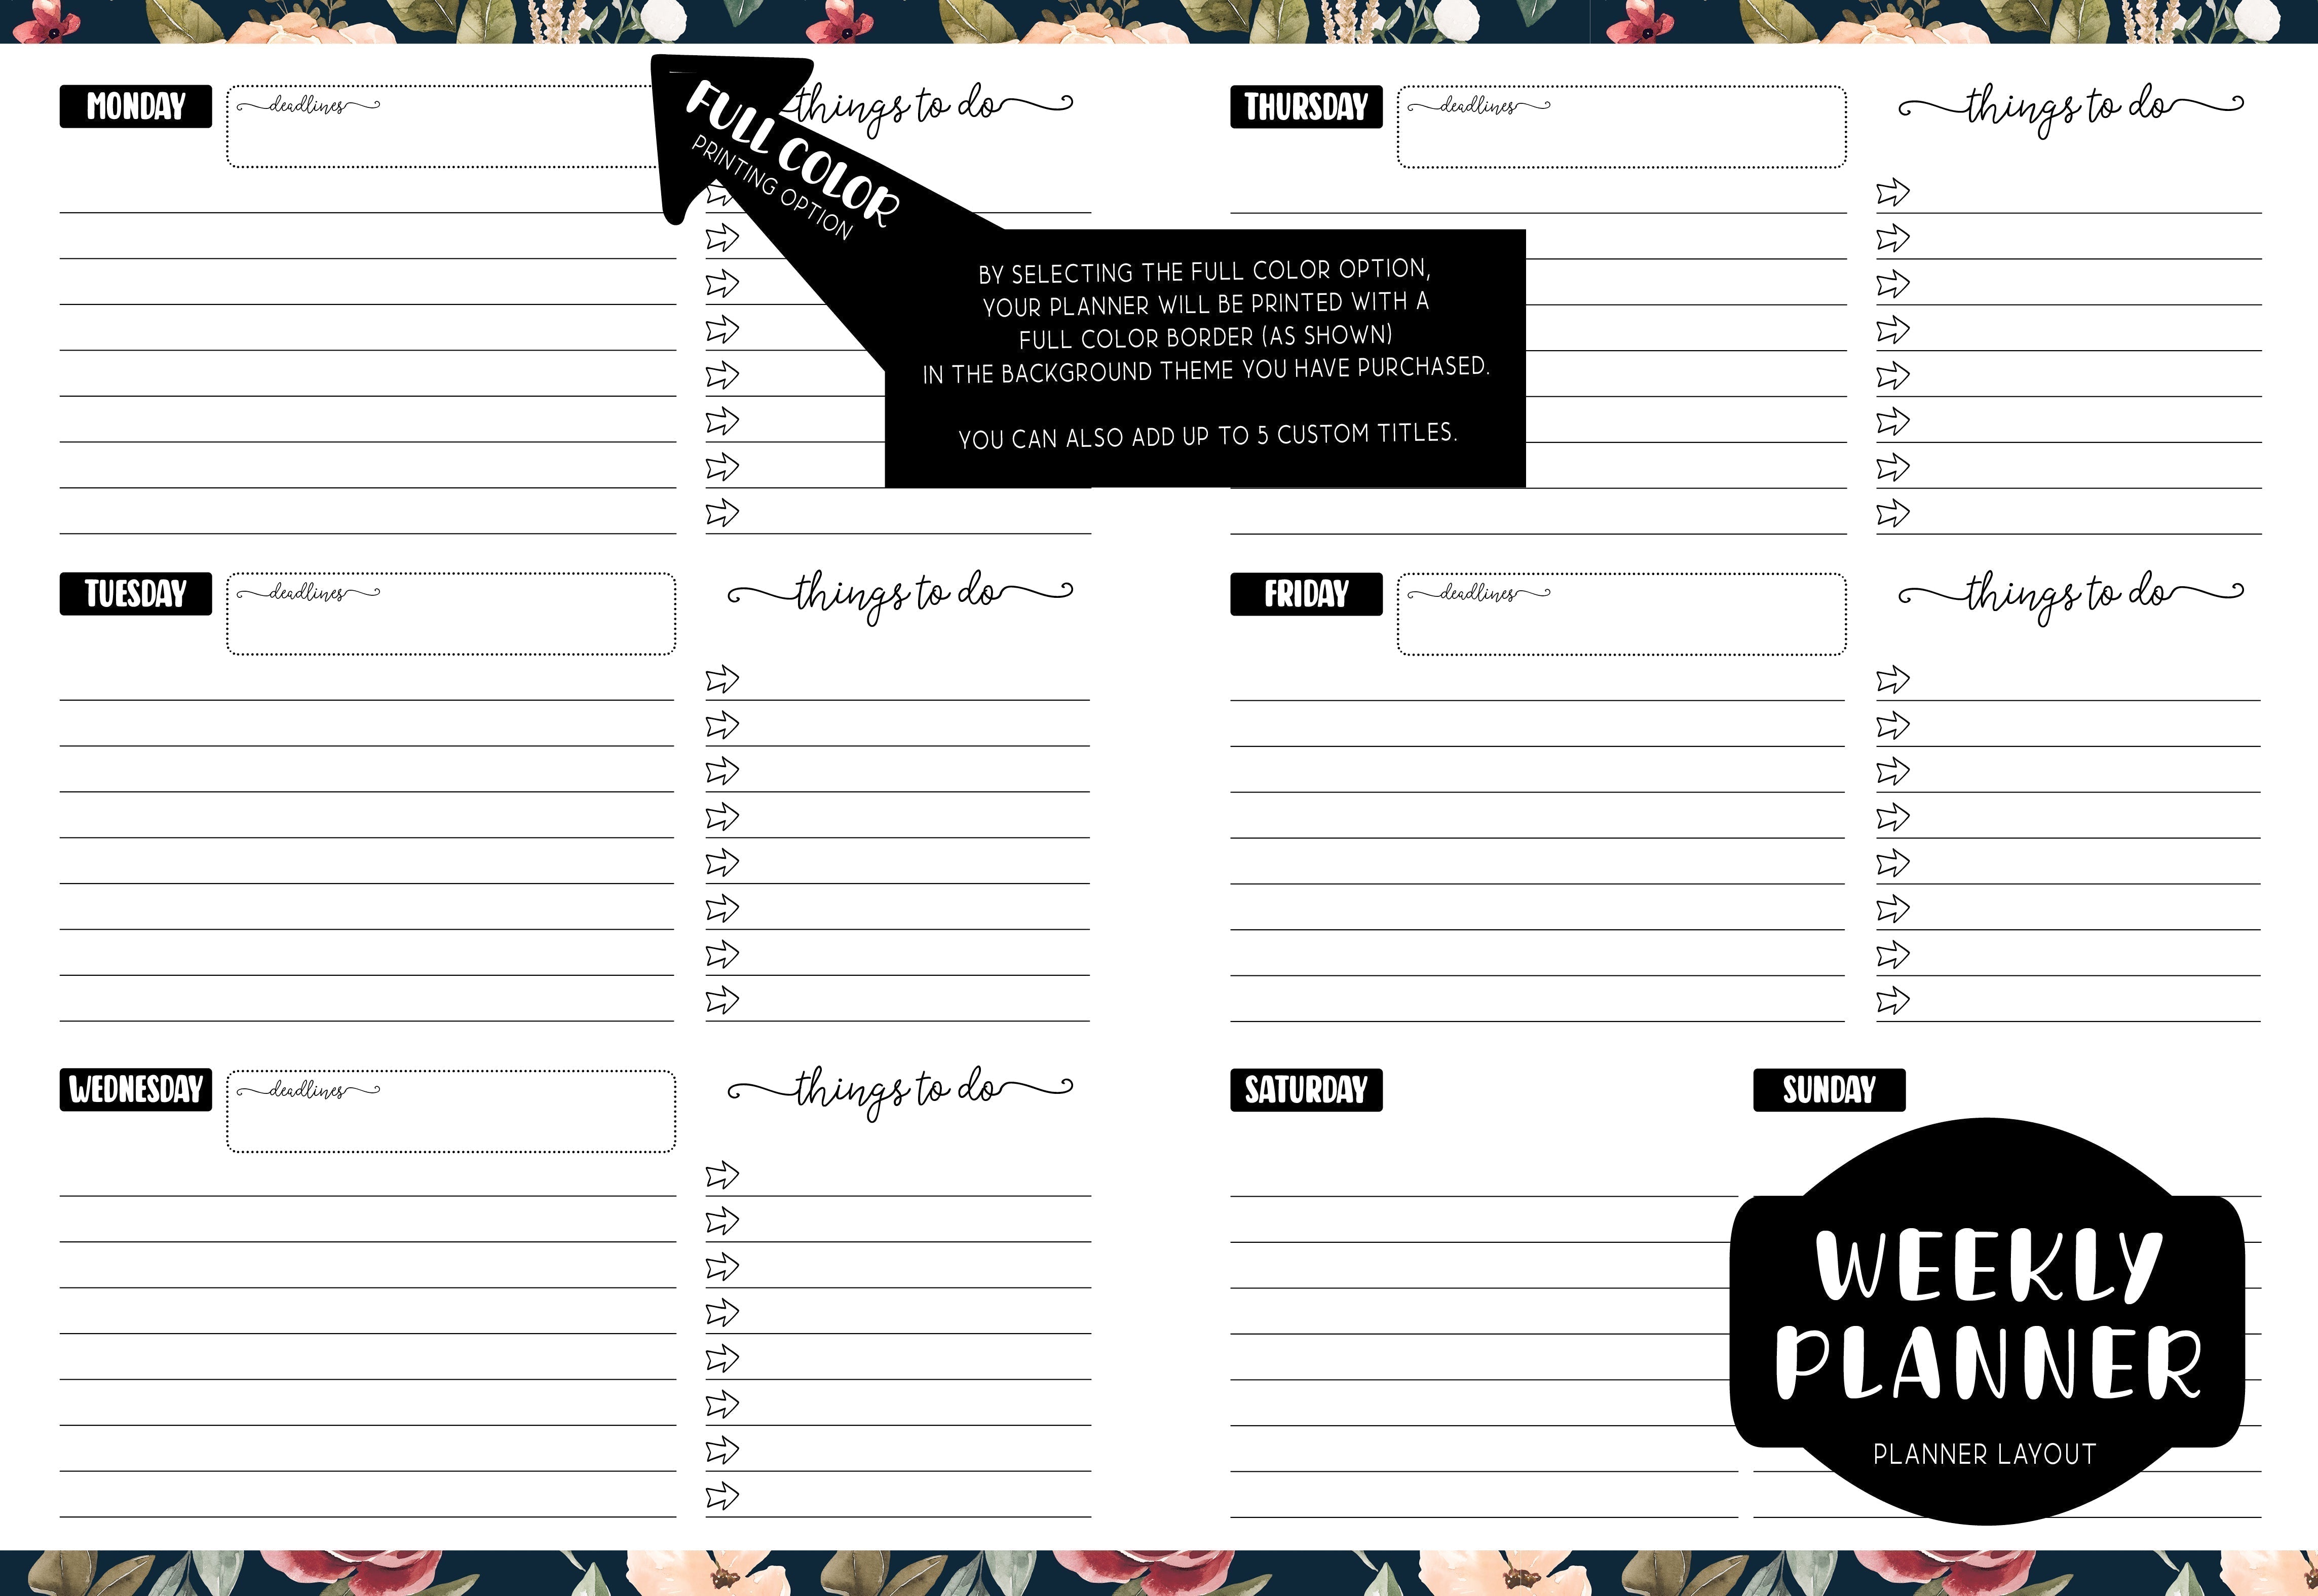 Weekly Planner - BOHO ABSTRACT 1